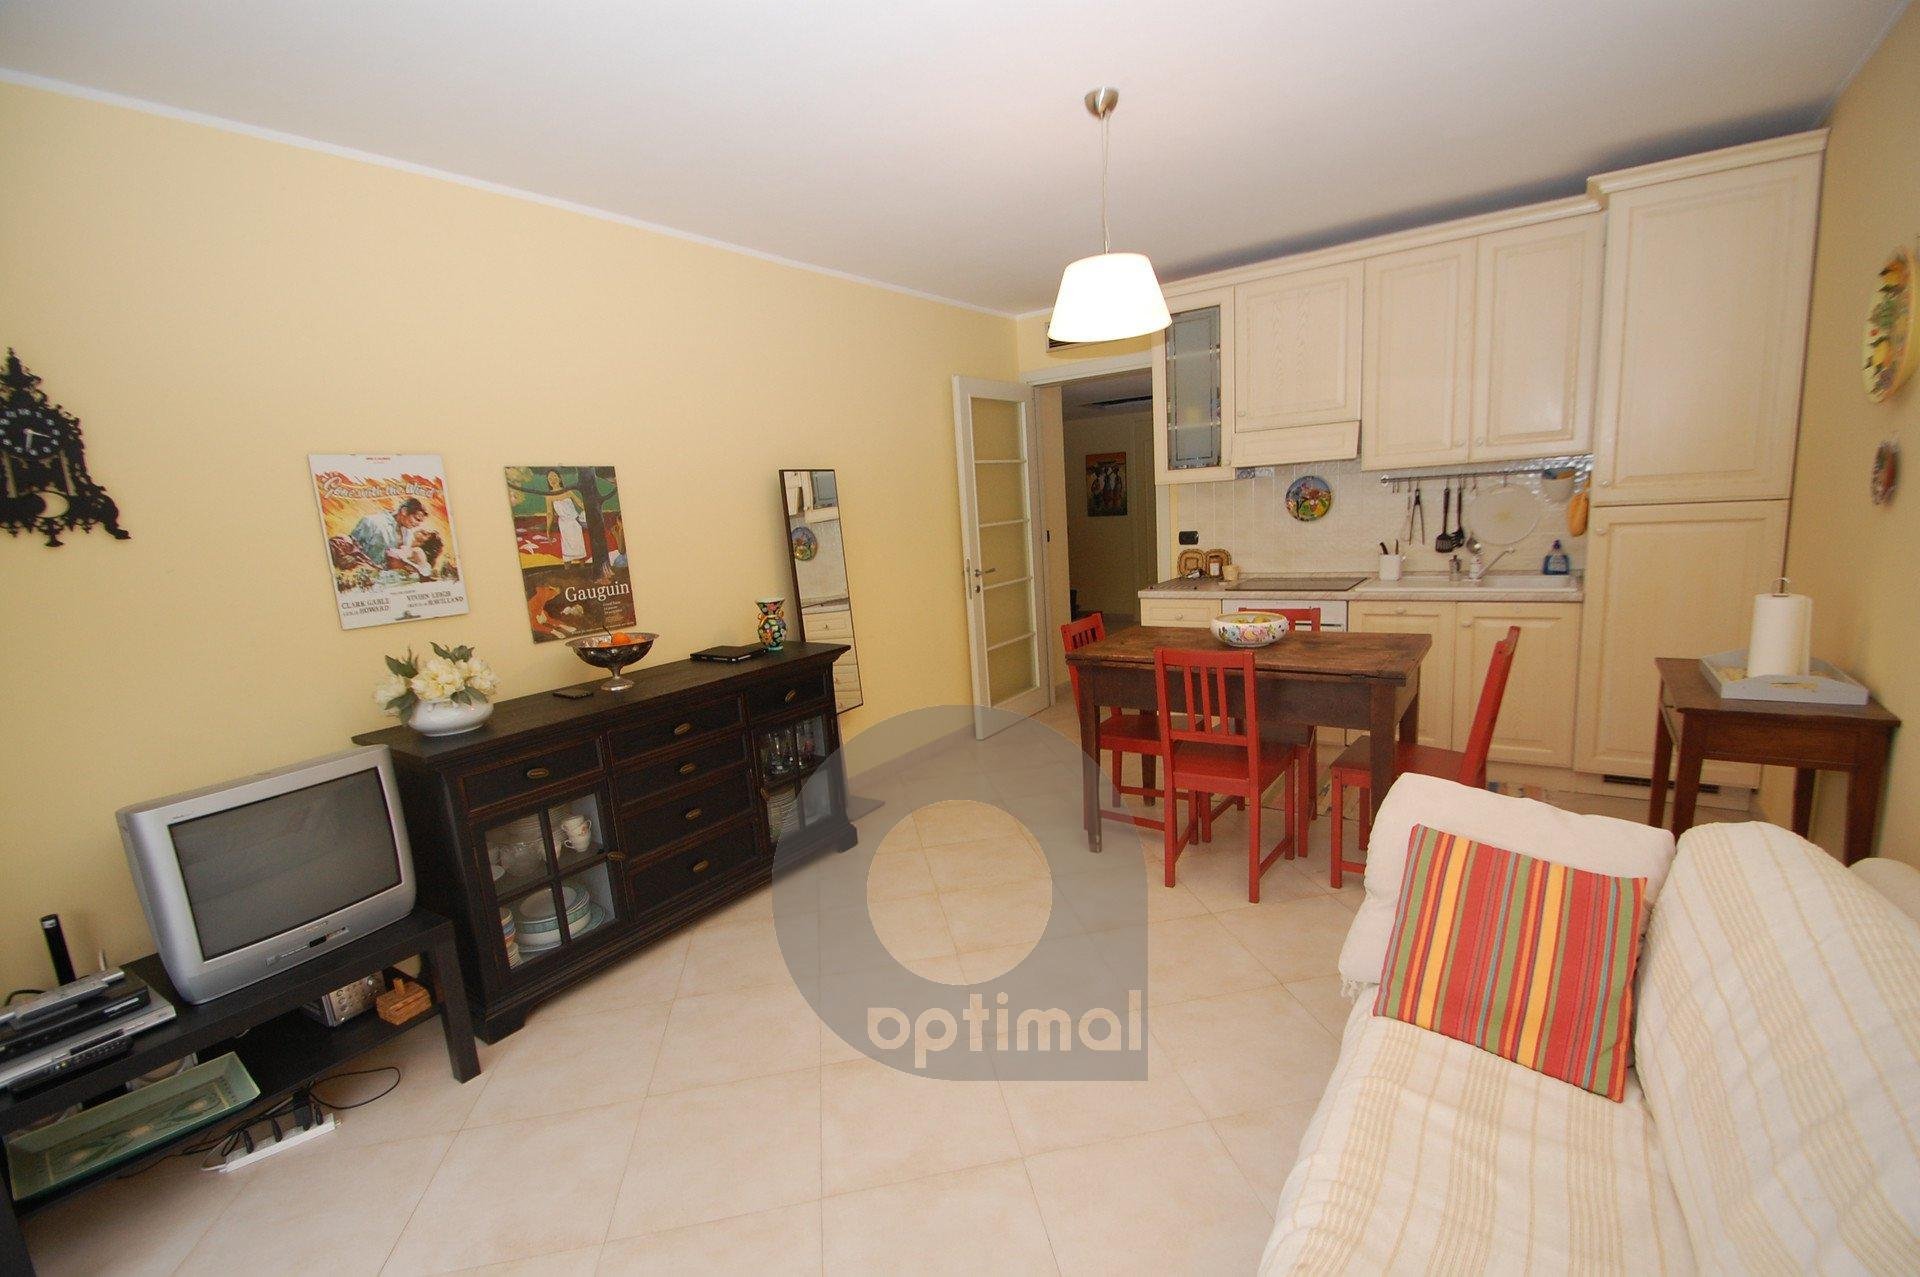 Beautiful 2 rooms apartment with terrace and lateral seaview very close to the center